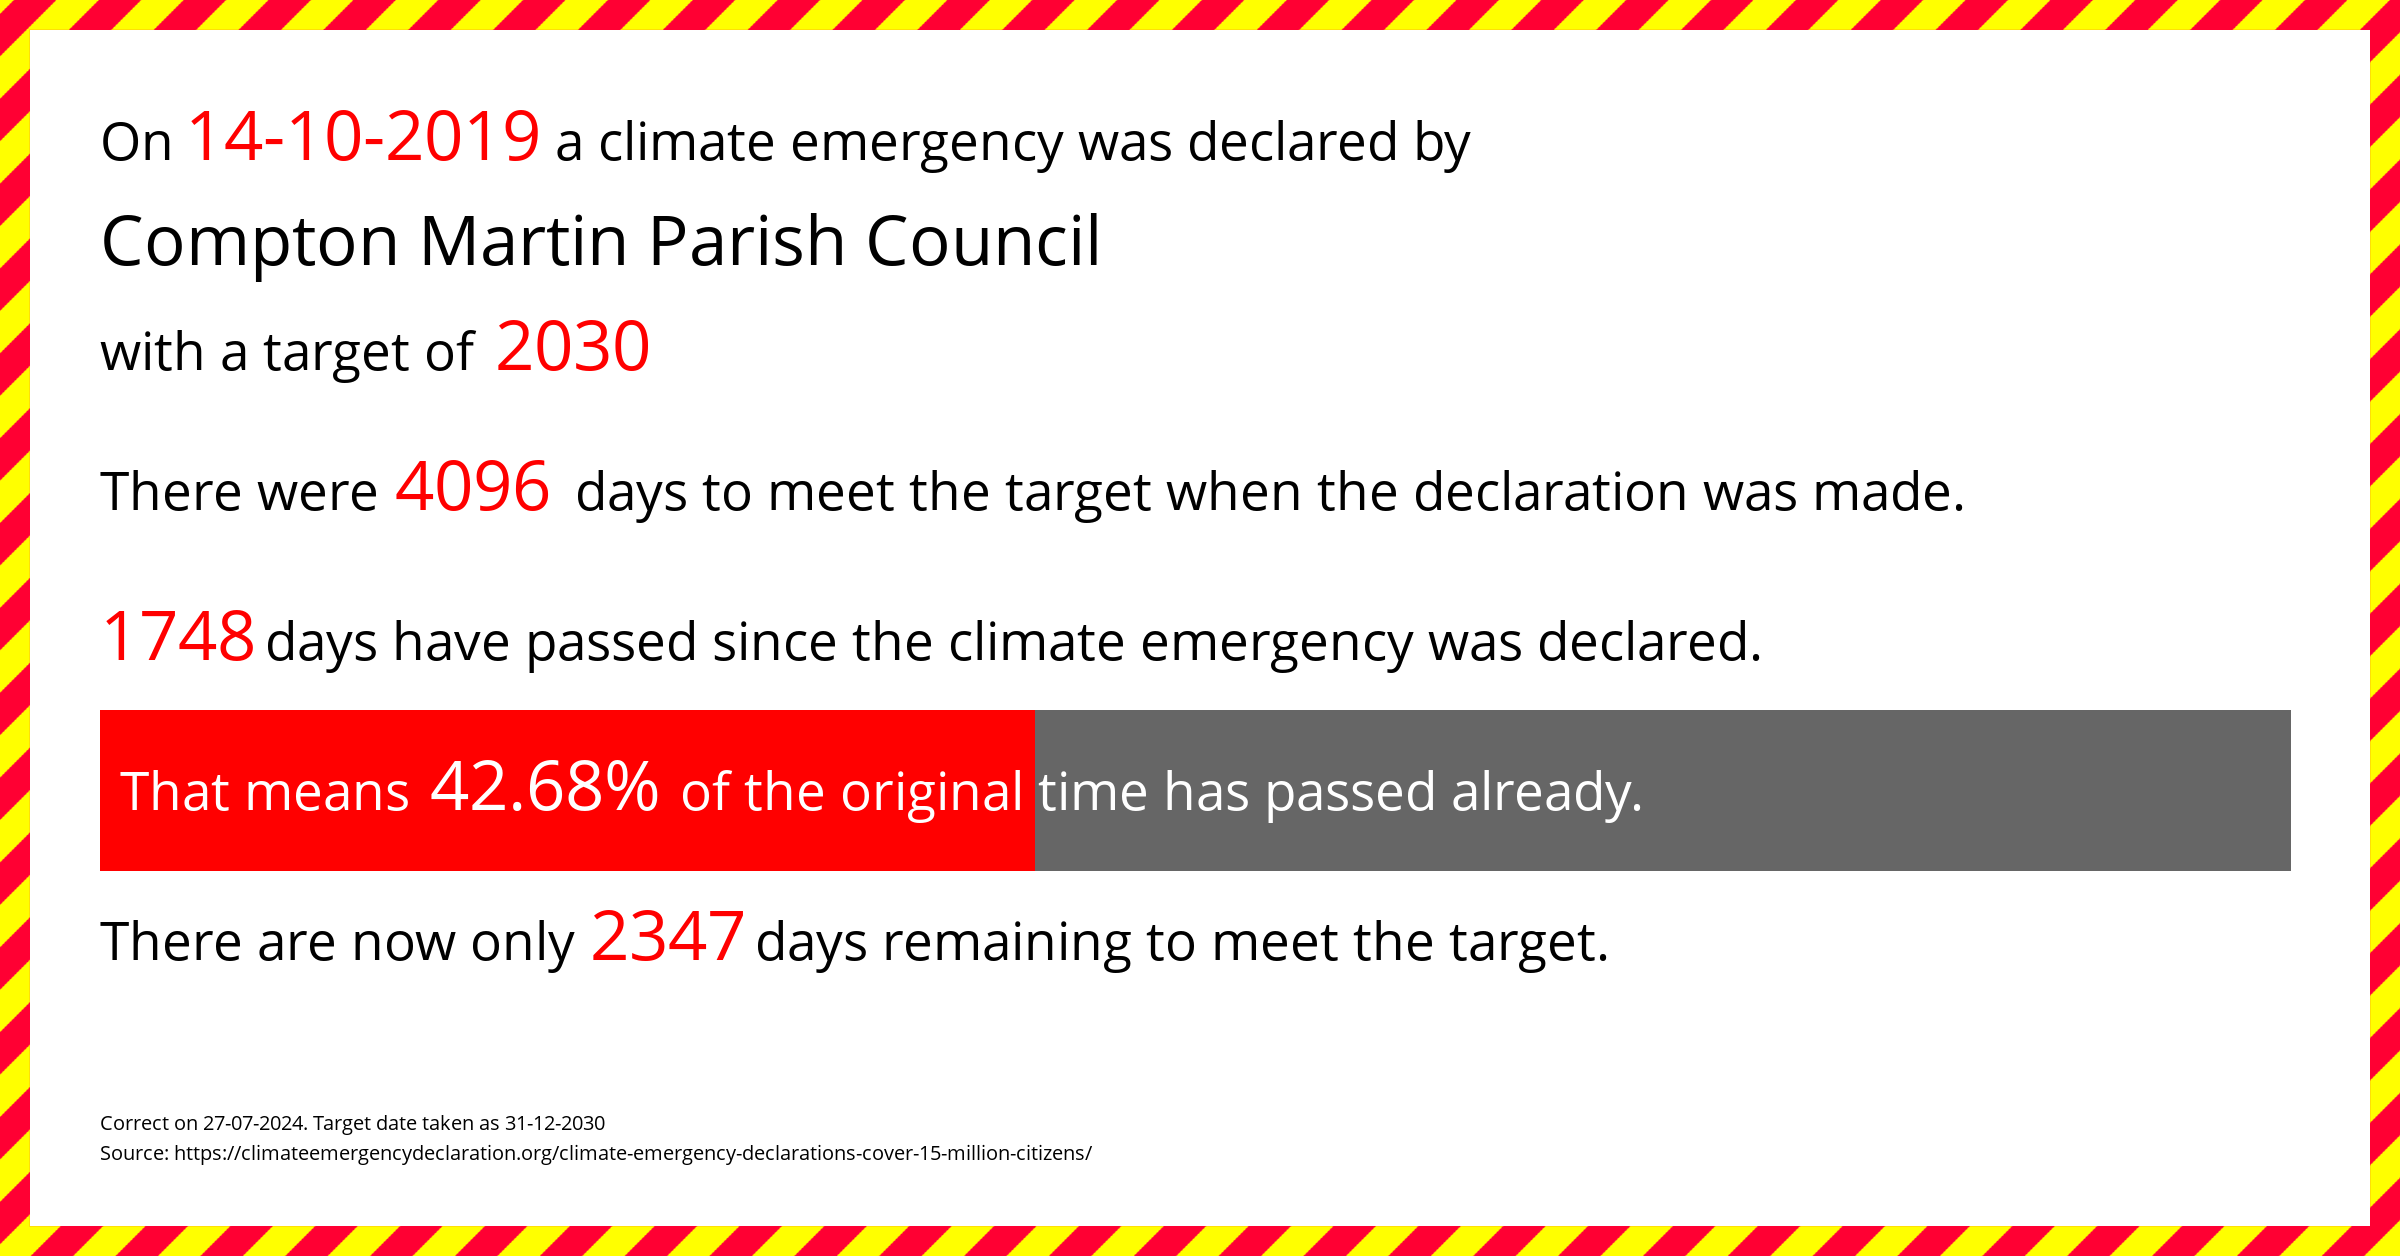 Compton Martin Parish Council  declared a Climate emergency on Monday 14th October 2019, with a target of 2030.